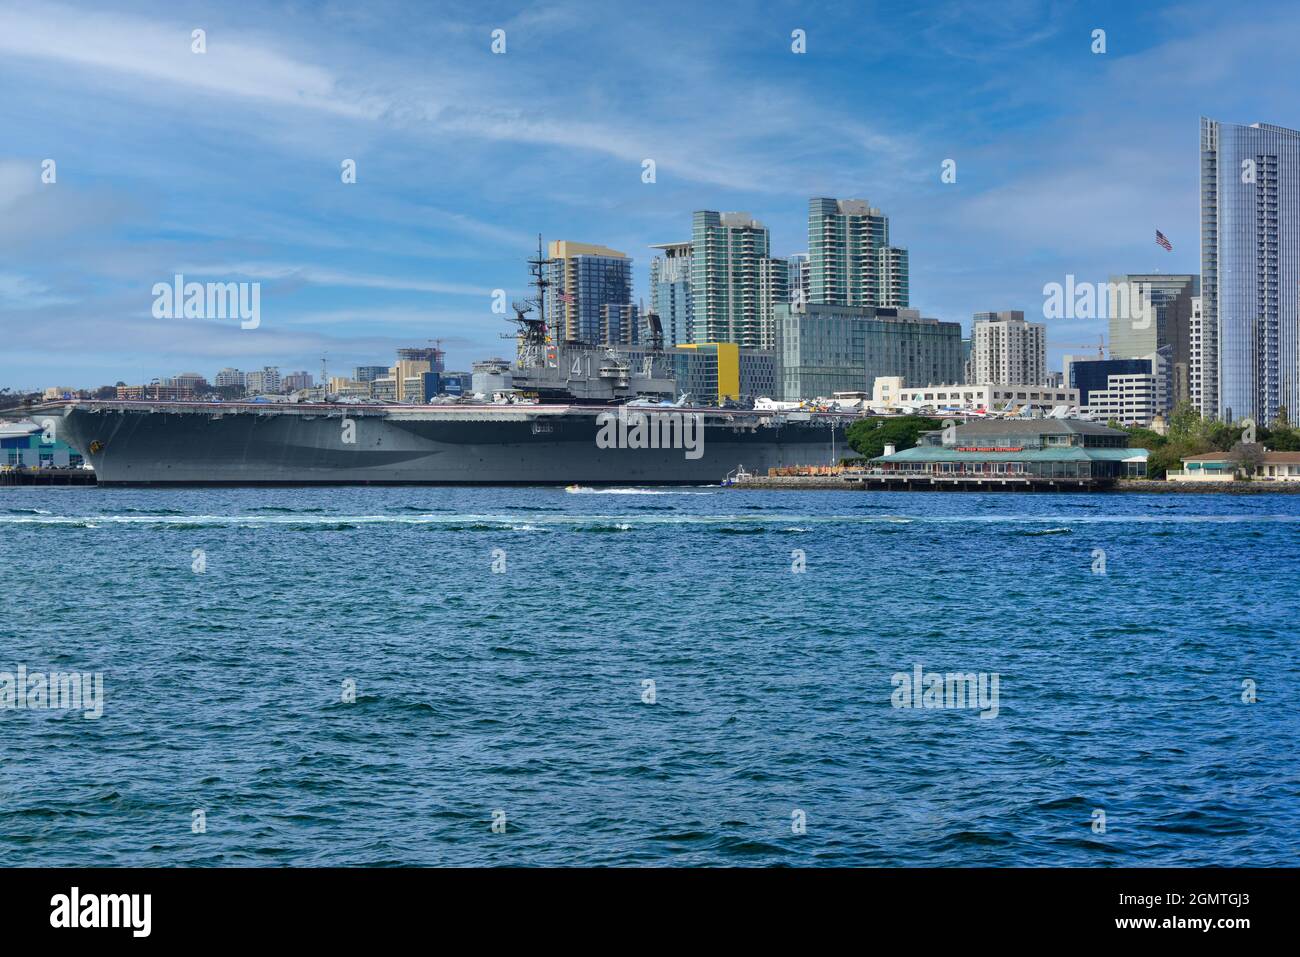 The USS Midway, the historical aircraft carrier battleship, now a museum,  at the San Diego Harbor with downtown San Diego skyline in background Stock Photo